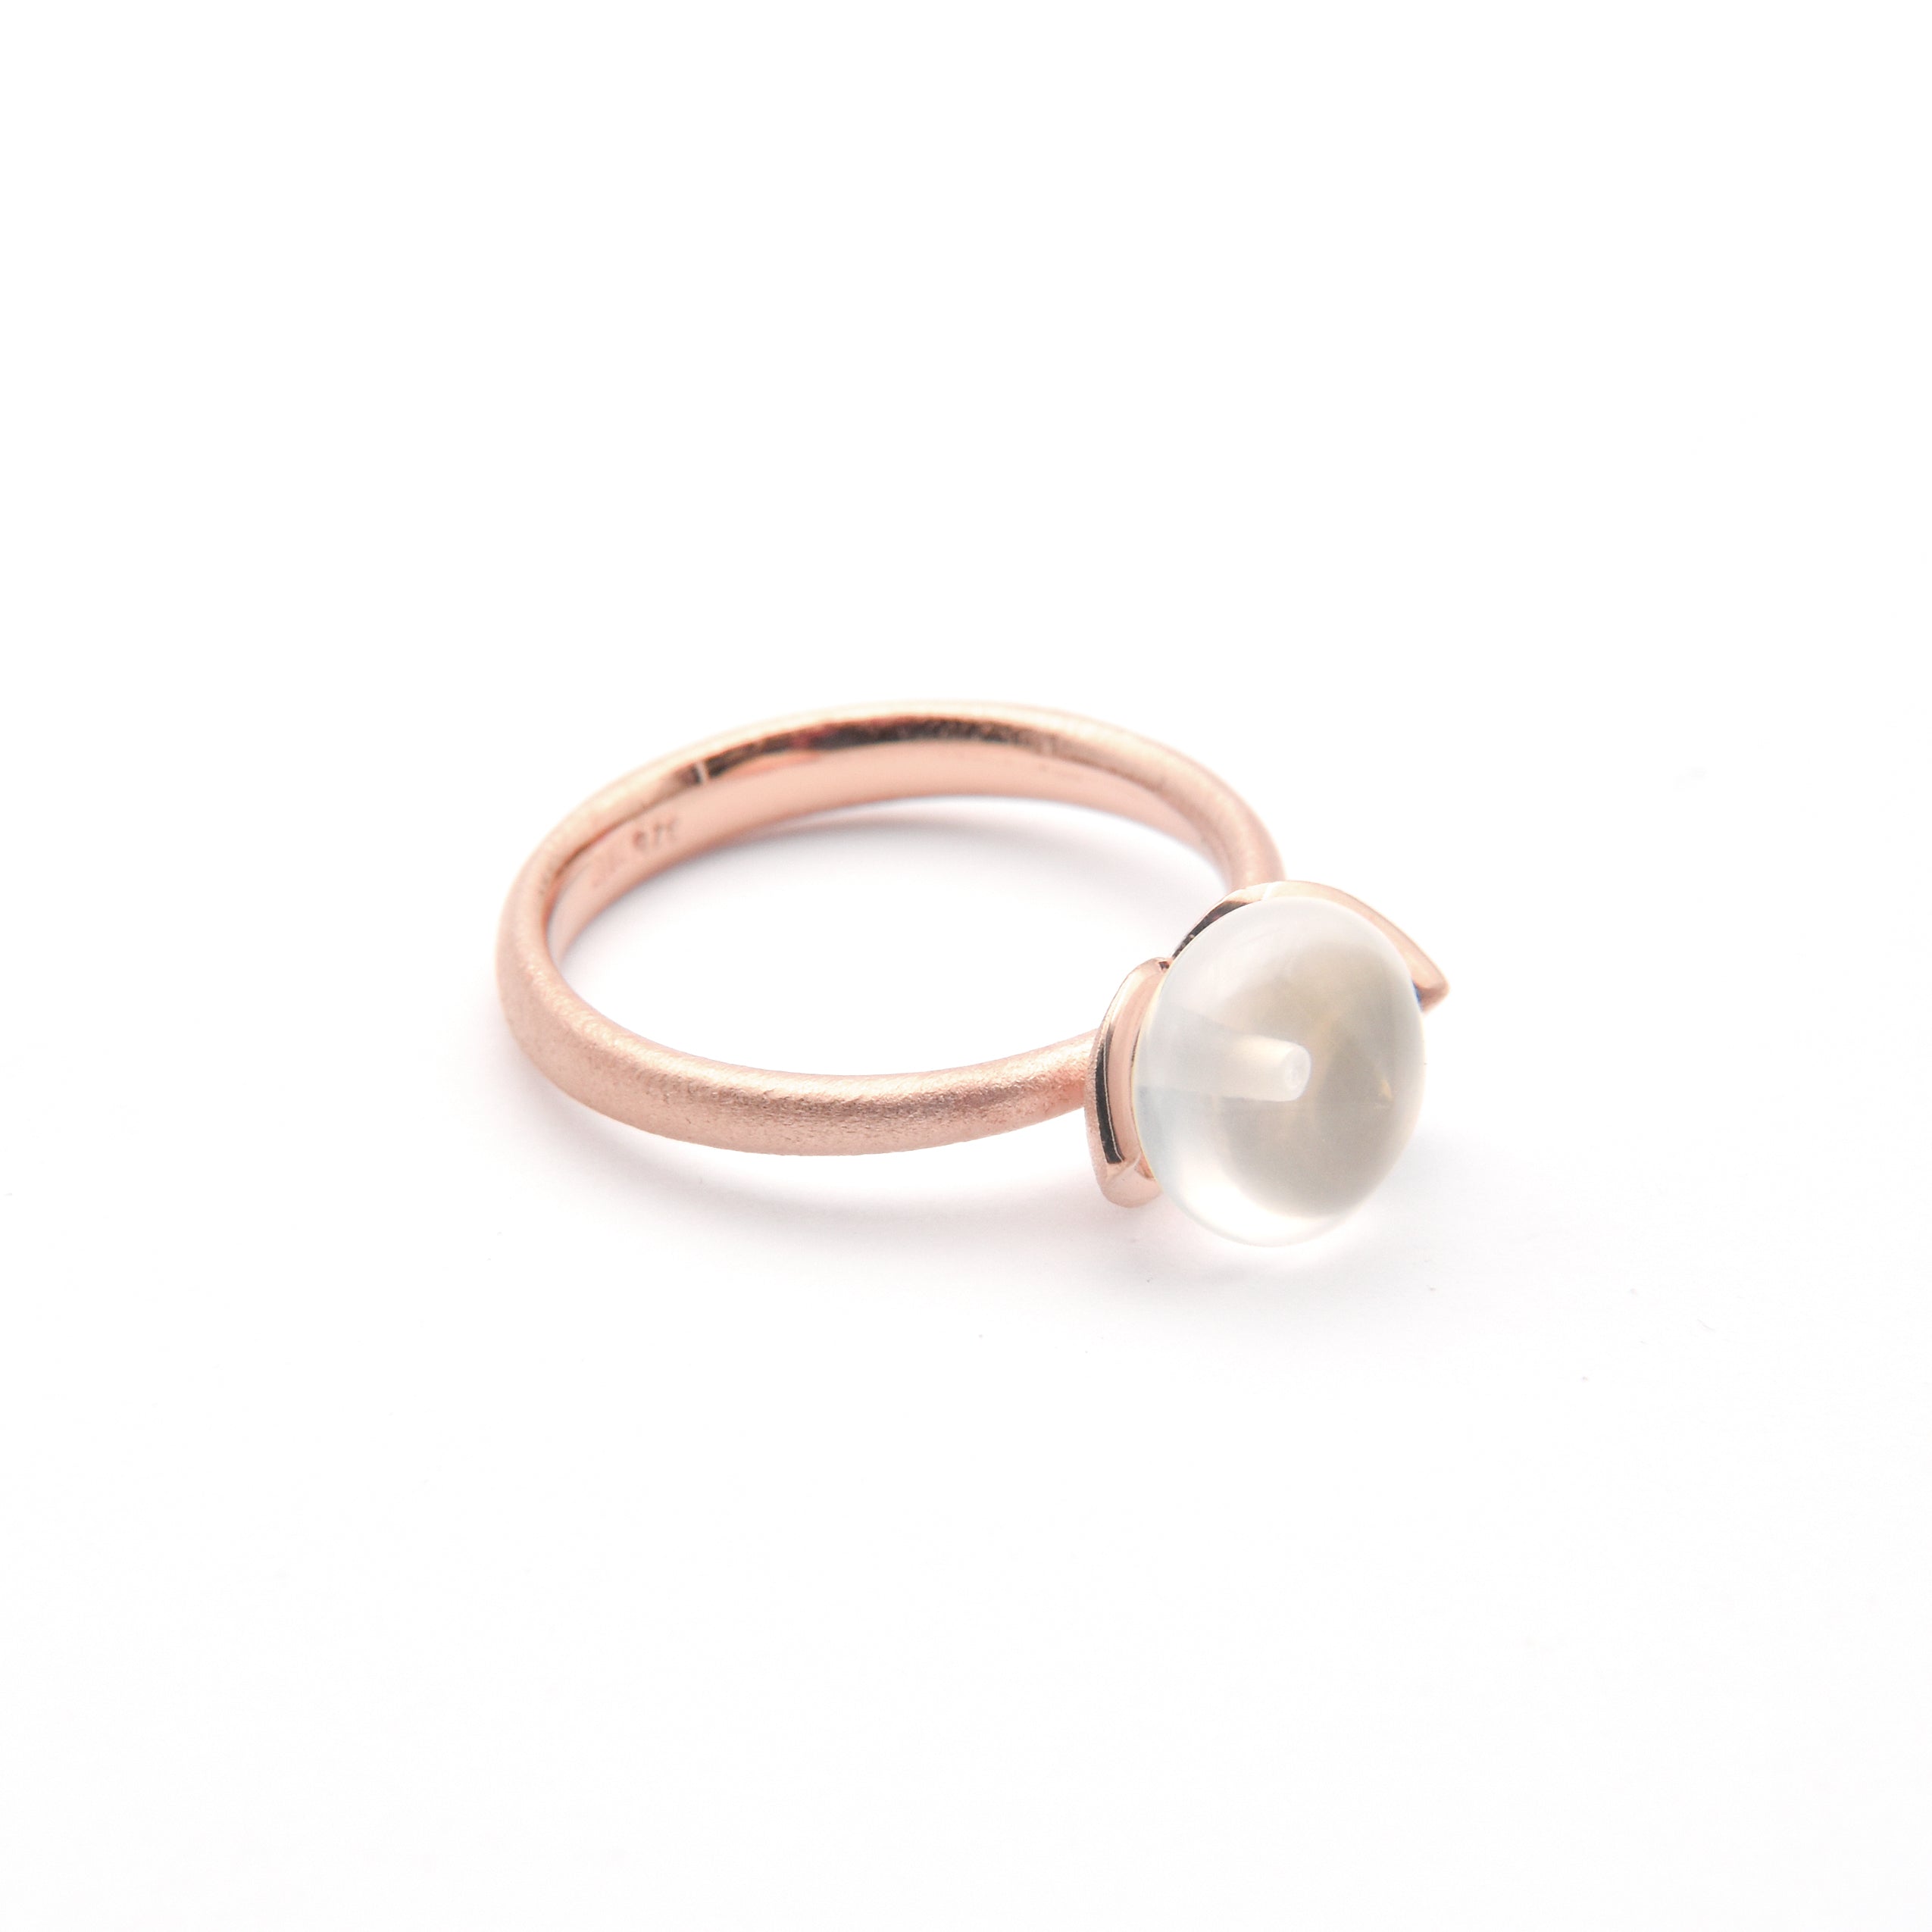 Dolce Ring "smal" mit Milchquarz 925/-